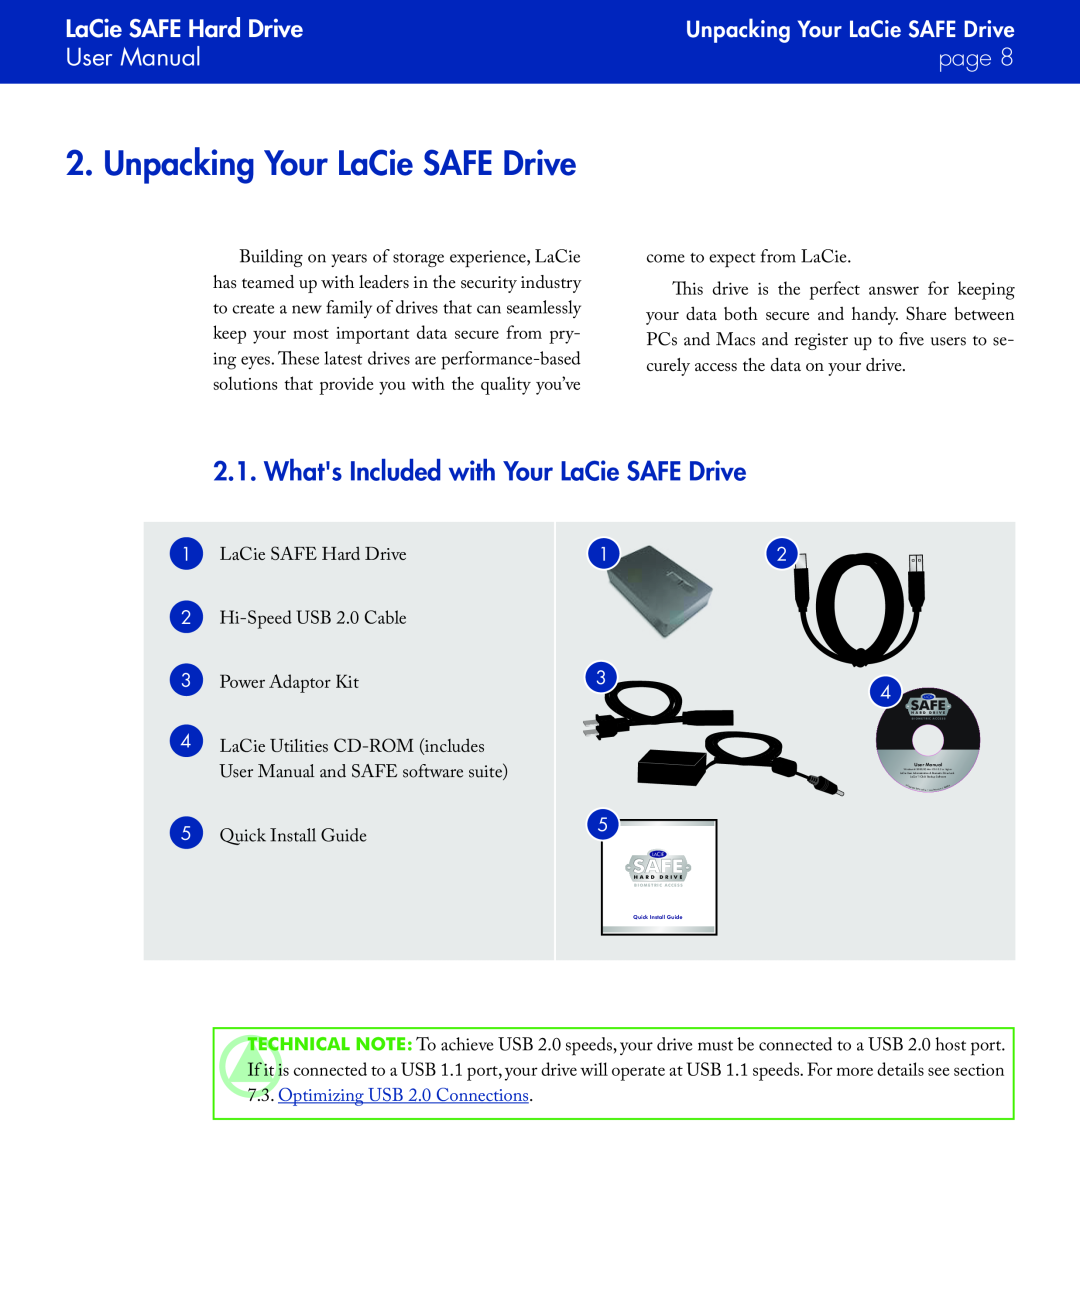 LaCie manual Unpacking Your LaCie SAFE Drive, Whats Included with Your LaCie SAFE Drive, Optimizing USB 2.0 Connections 